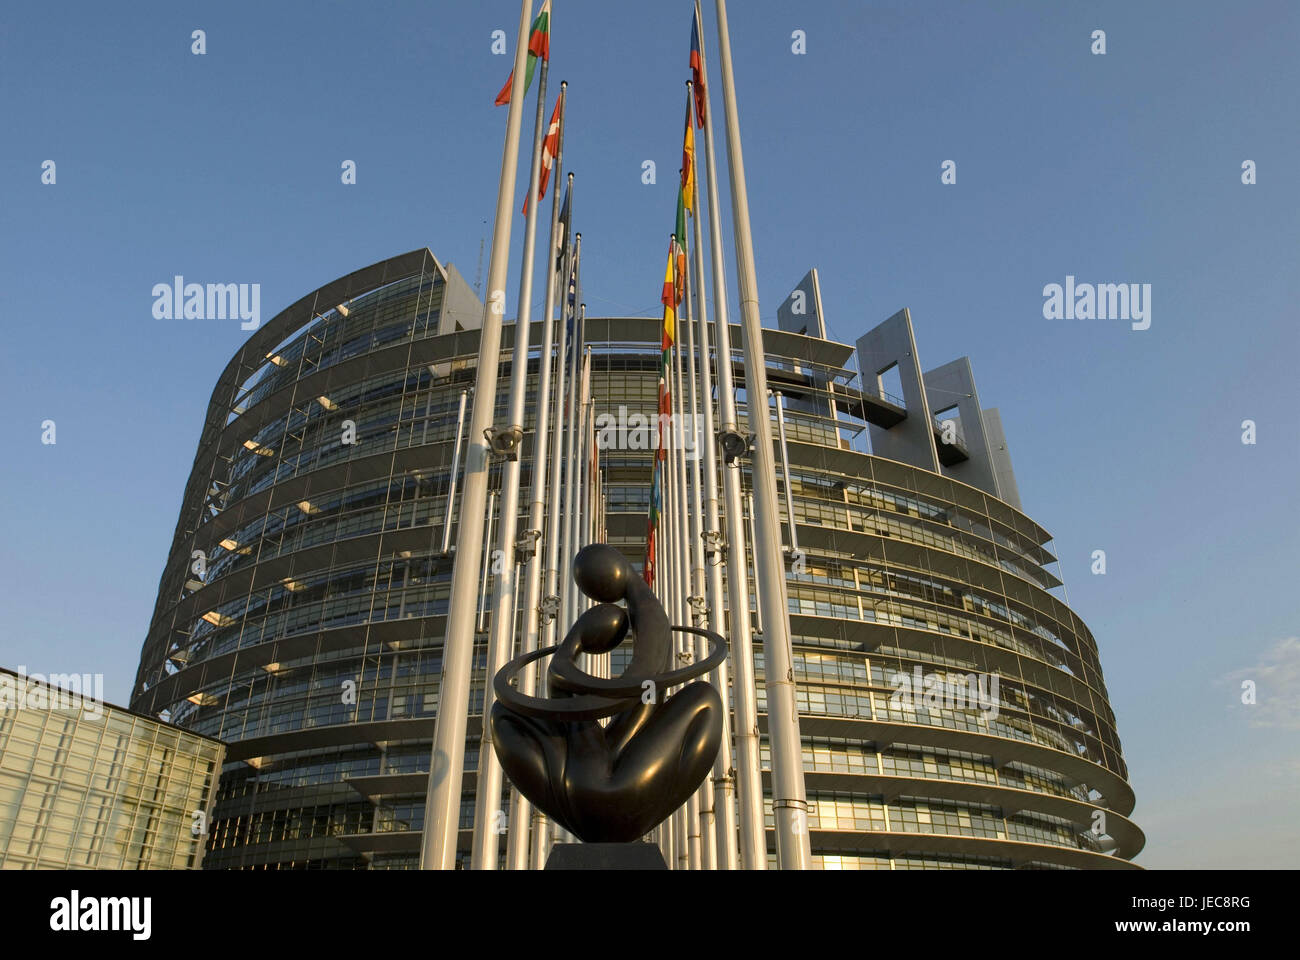 France, Alsace, Strasbourg, European Parliament, chamber of deputies, flags, sculpture, Europe, architecture, building, structure, glass front, flags, nations, passed away, blow, European, flagpoles, glass front, construction, outside, deserted, art, St. of art, sculpture, Stock Photo